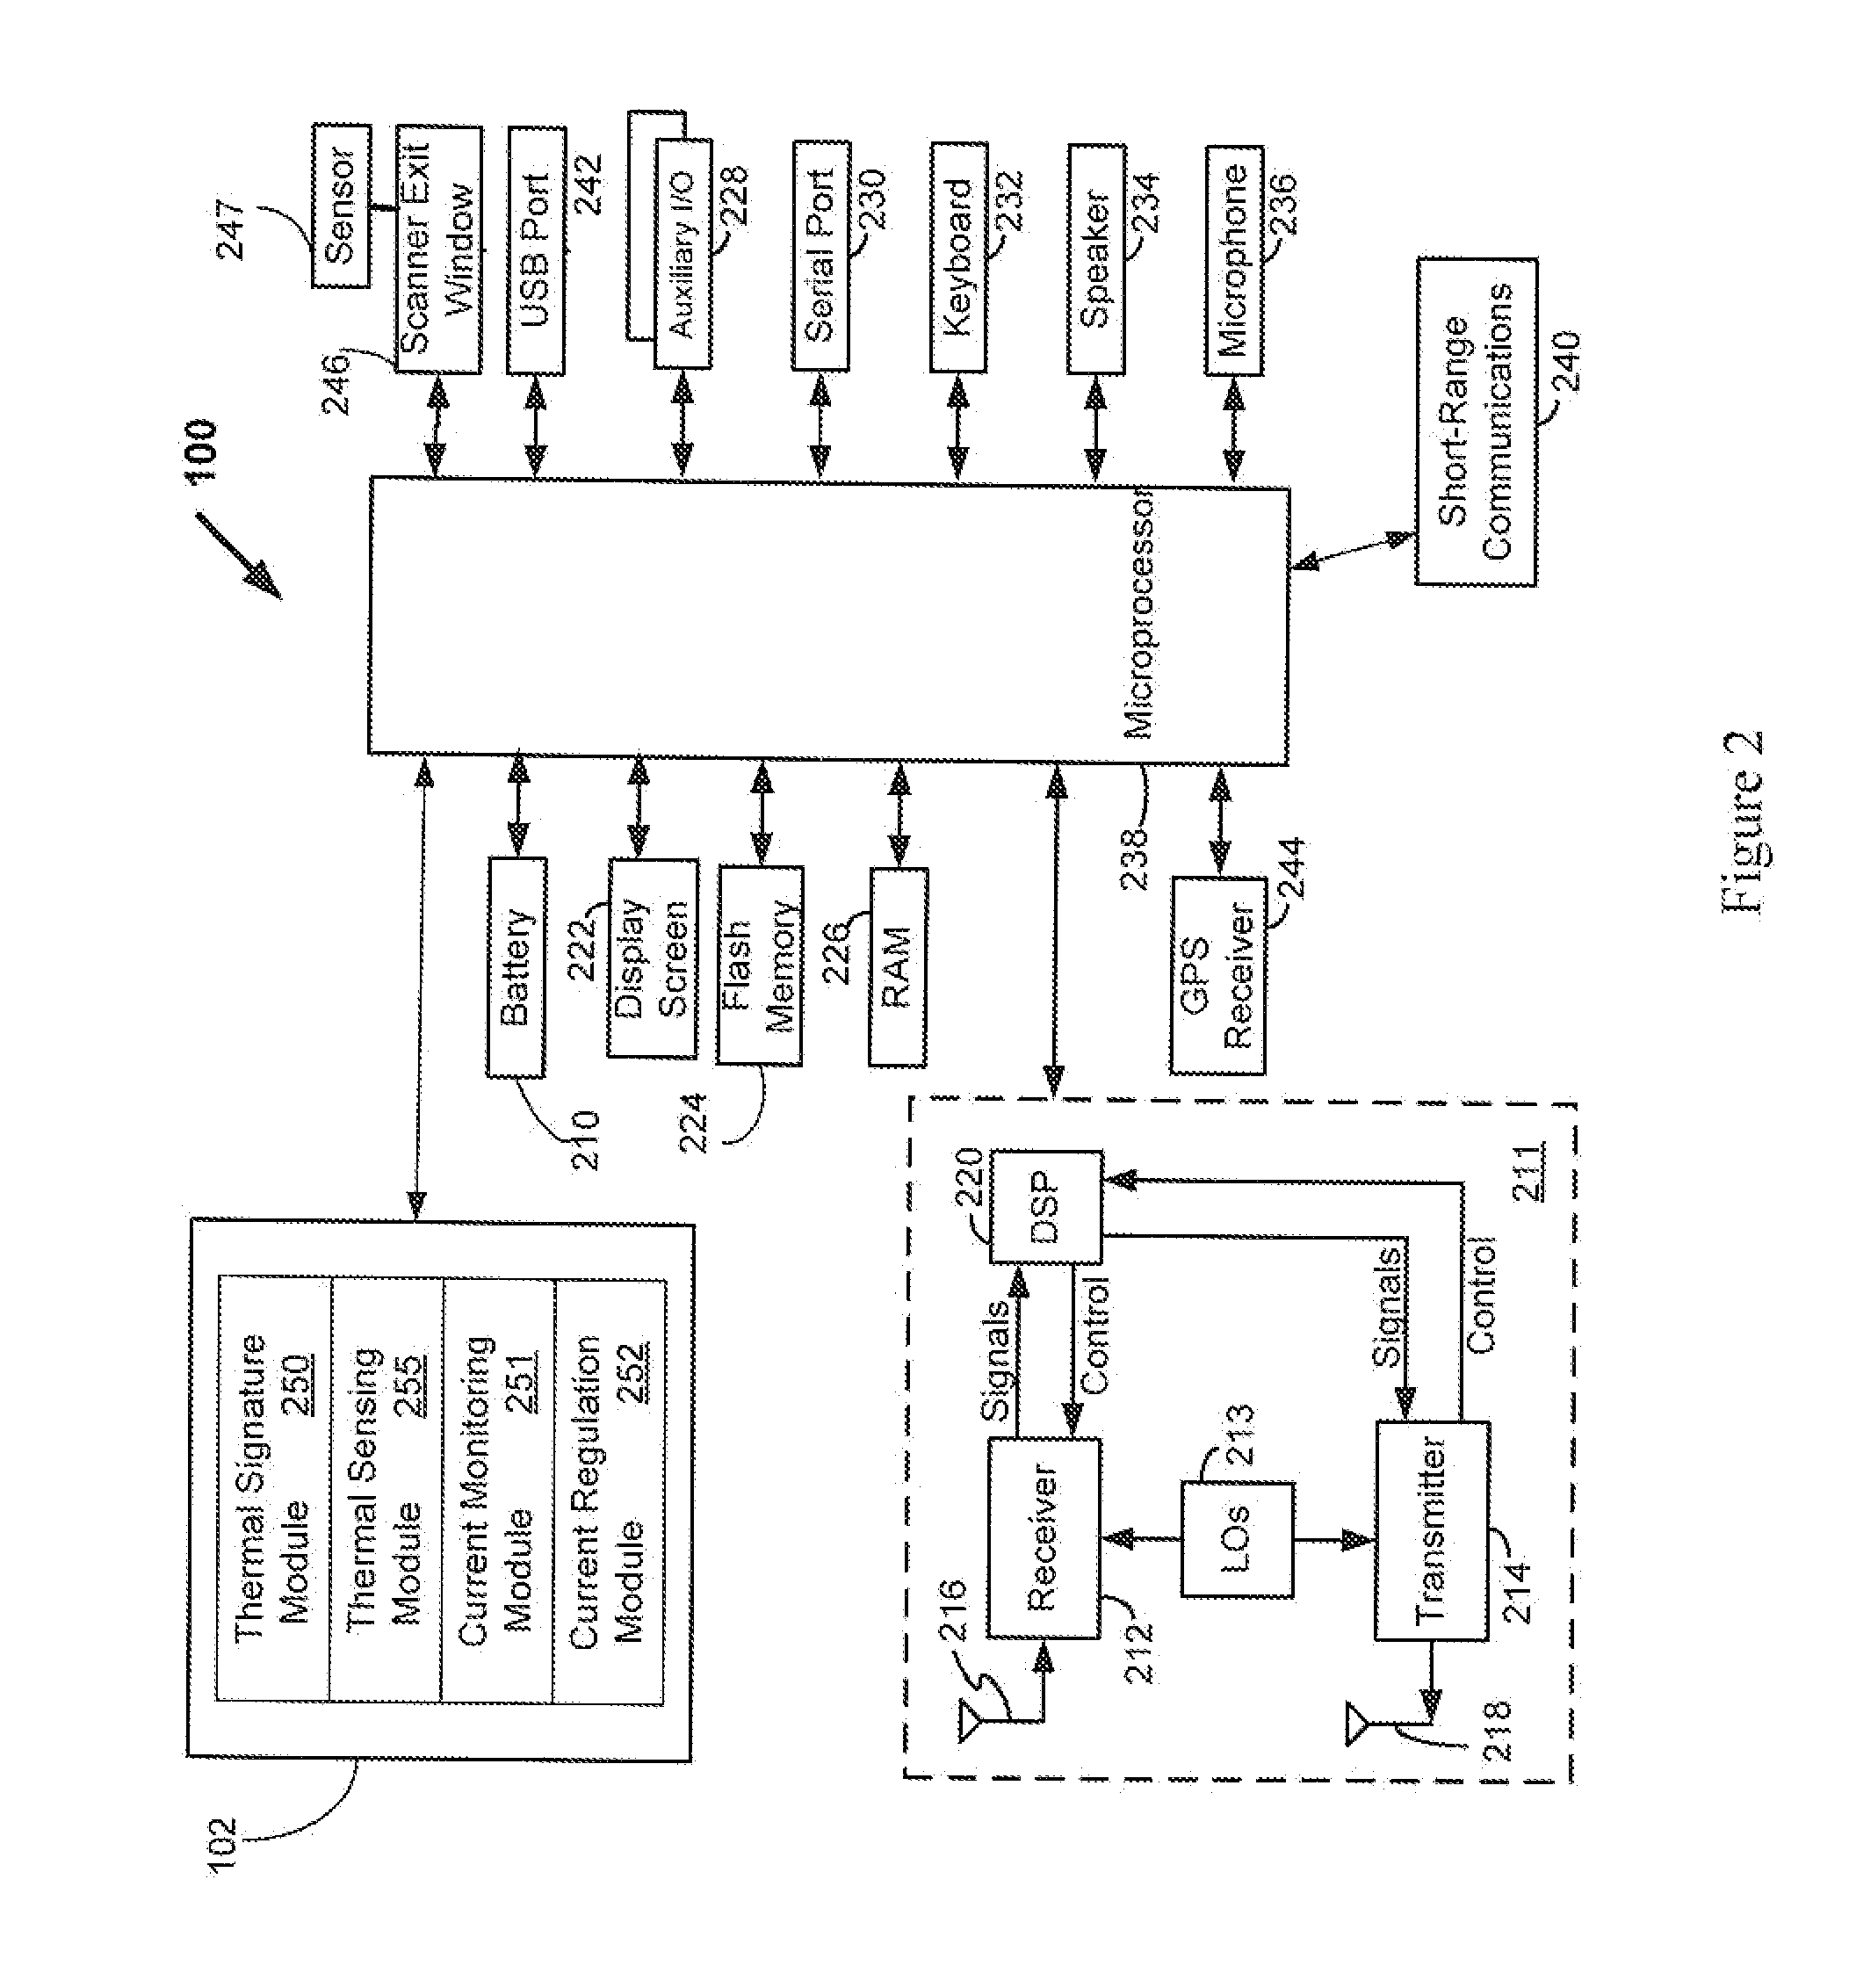 Method and apparatus for selective heating for electronic components of a handheld device